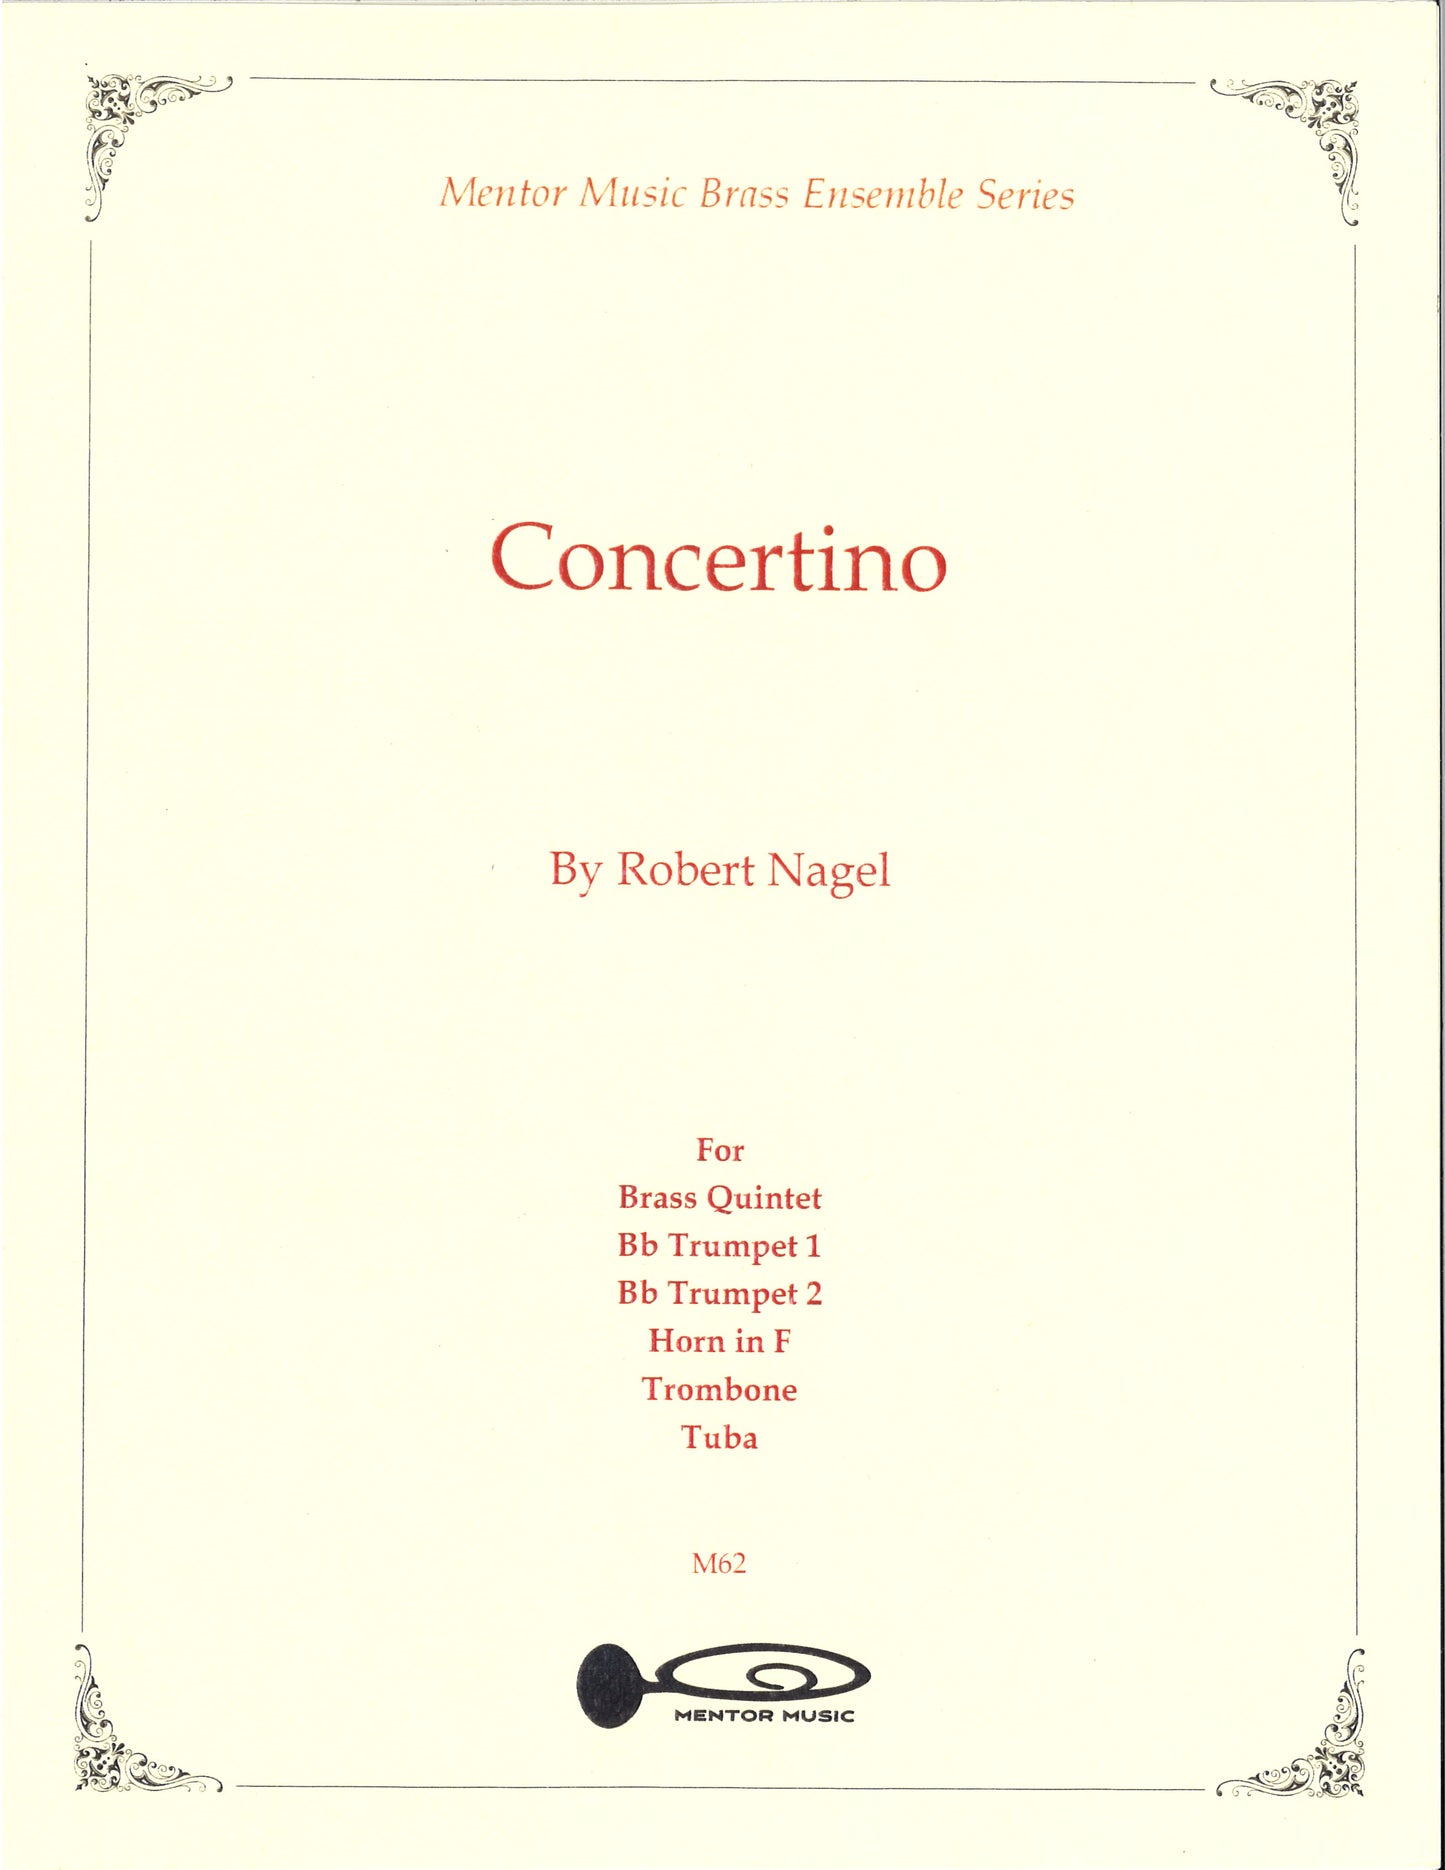 Concertino for Brass Quintet